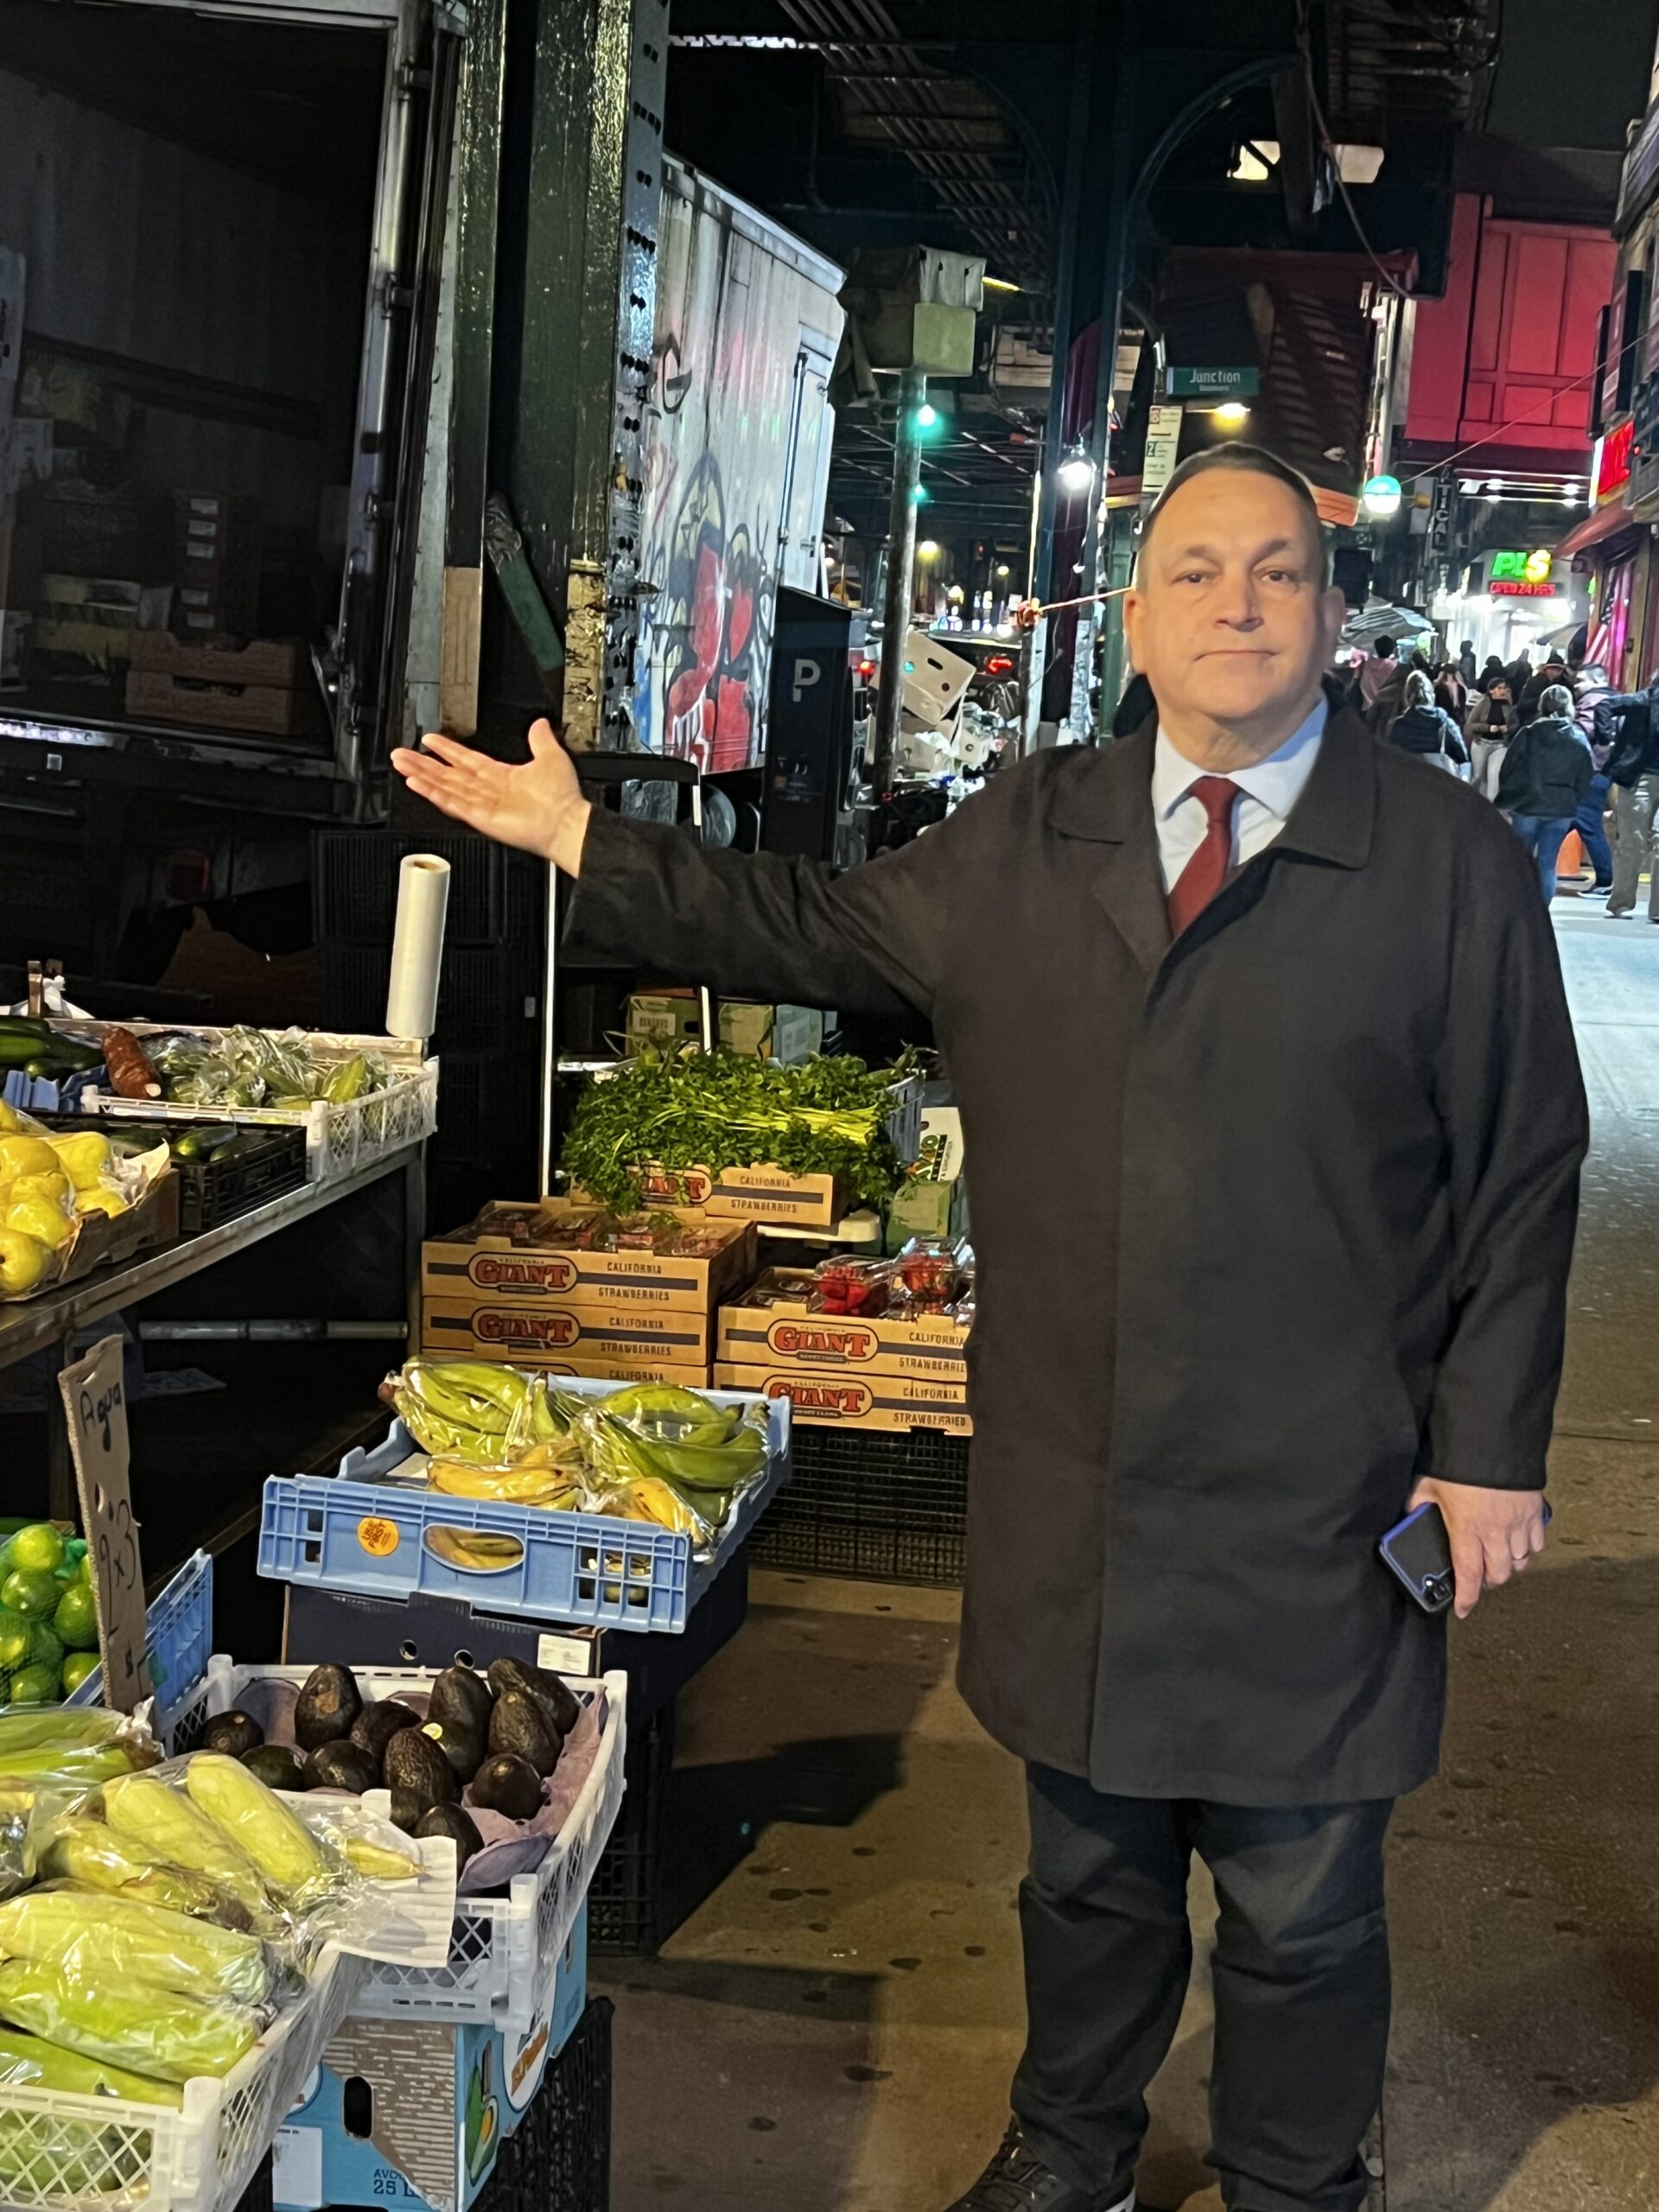 Civic Leader and Assembly Candidate Hiram Monserrate Shines Light on Roosevelt Avenue’s  Challenges